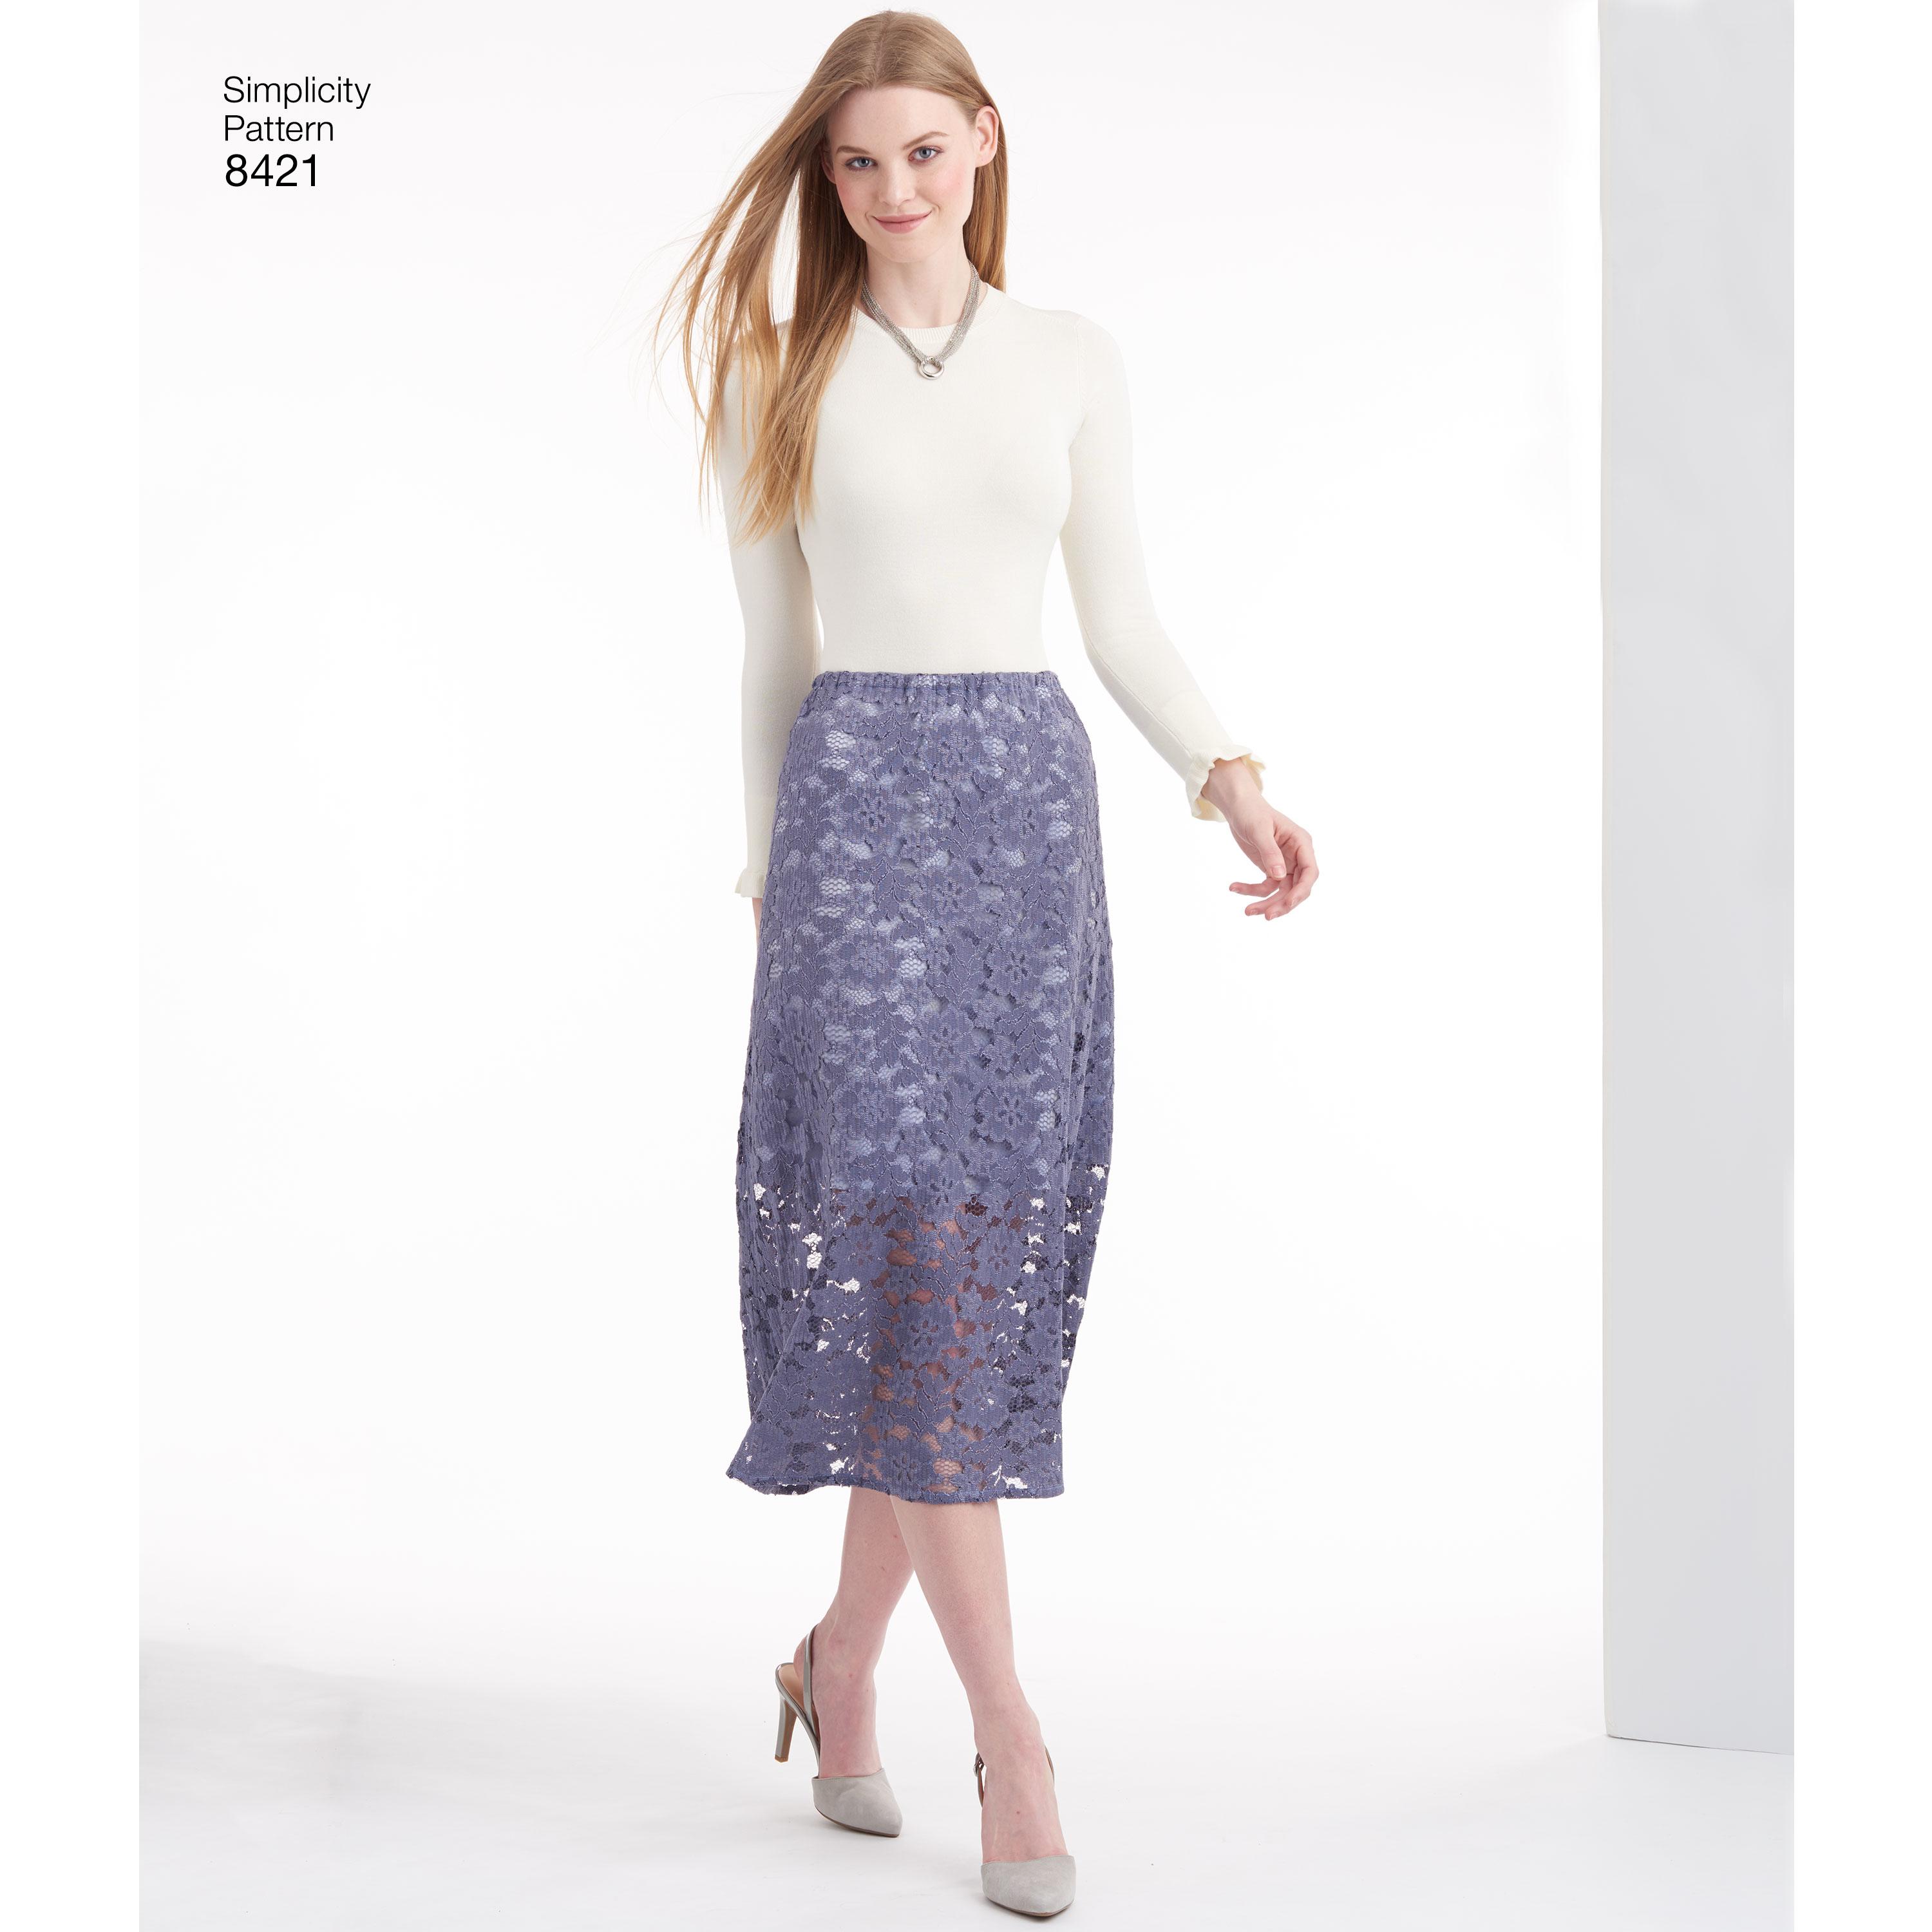 Simplicity S8421 Women's Skirts in Three lengths with Hem Variations